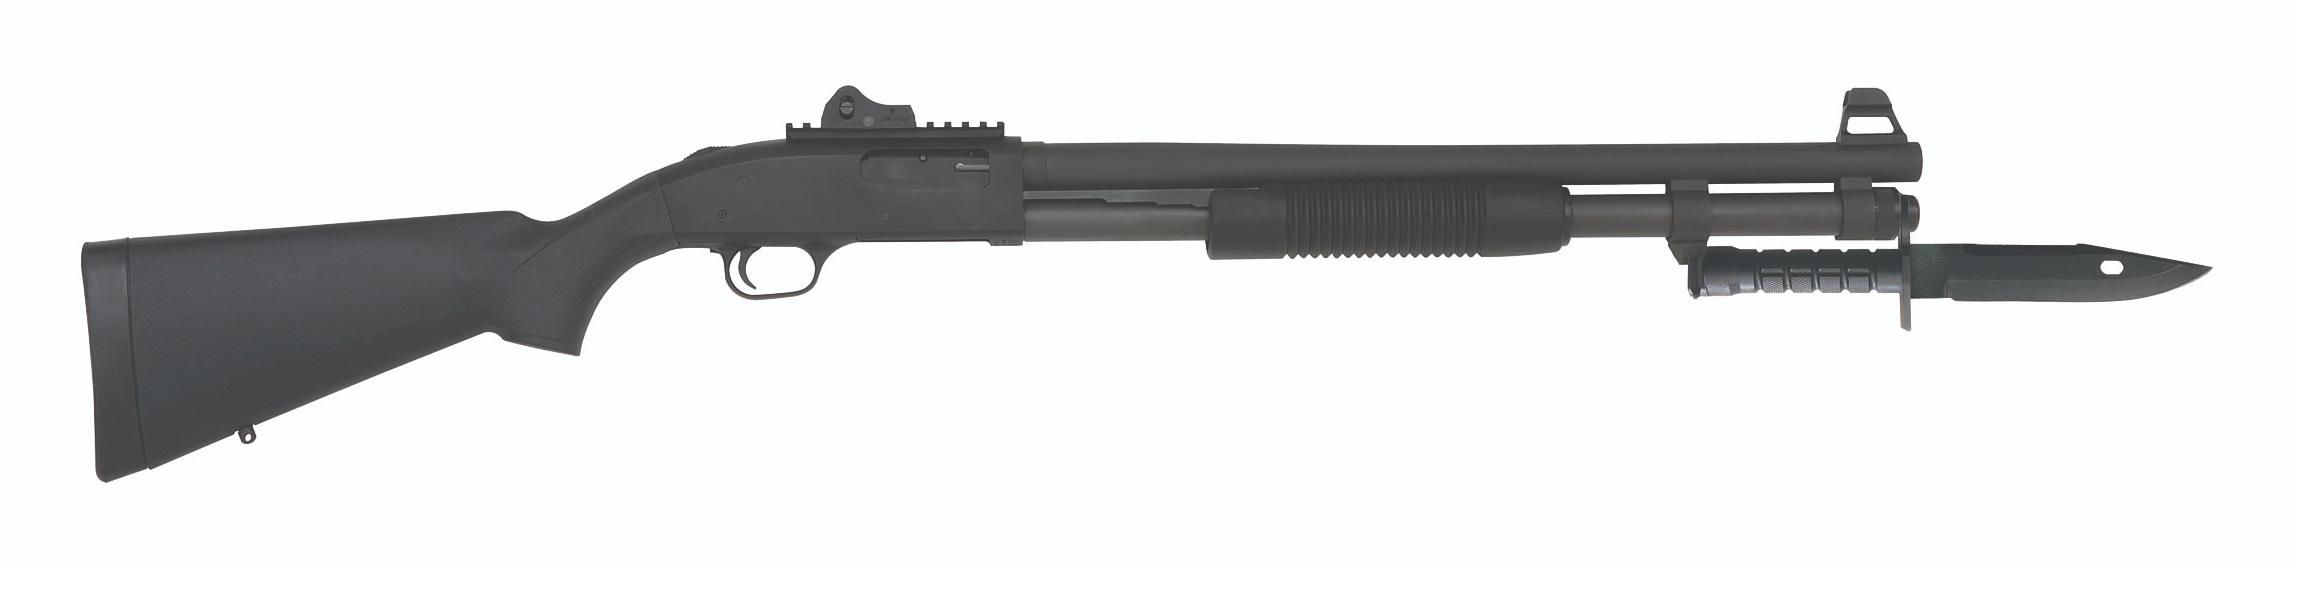 Mossberg 50771 590A1 Tactical SPX 12 Gauge 3 Inch 81 20 Inch Parkerized Heavy-Walled Barrel Black Rec with Ghost Ring Rear Sight Black Synthetic Stock Right Hand Includes Bayonet Lug  | 12GA | 015813507714